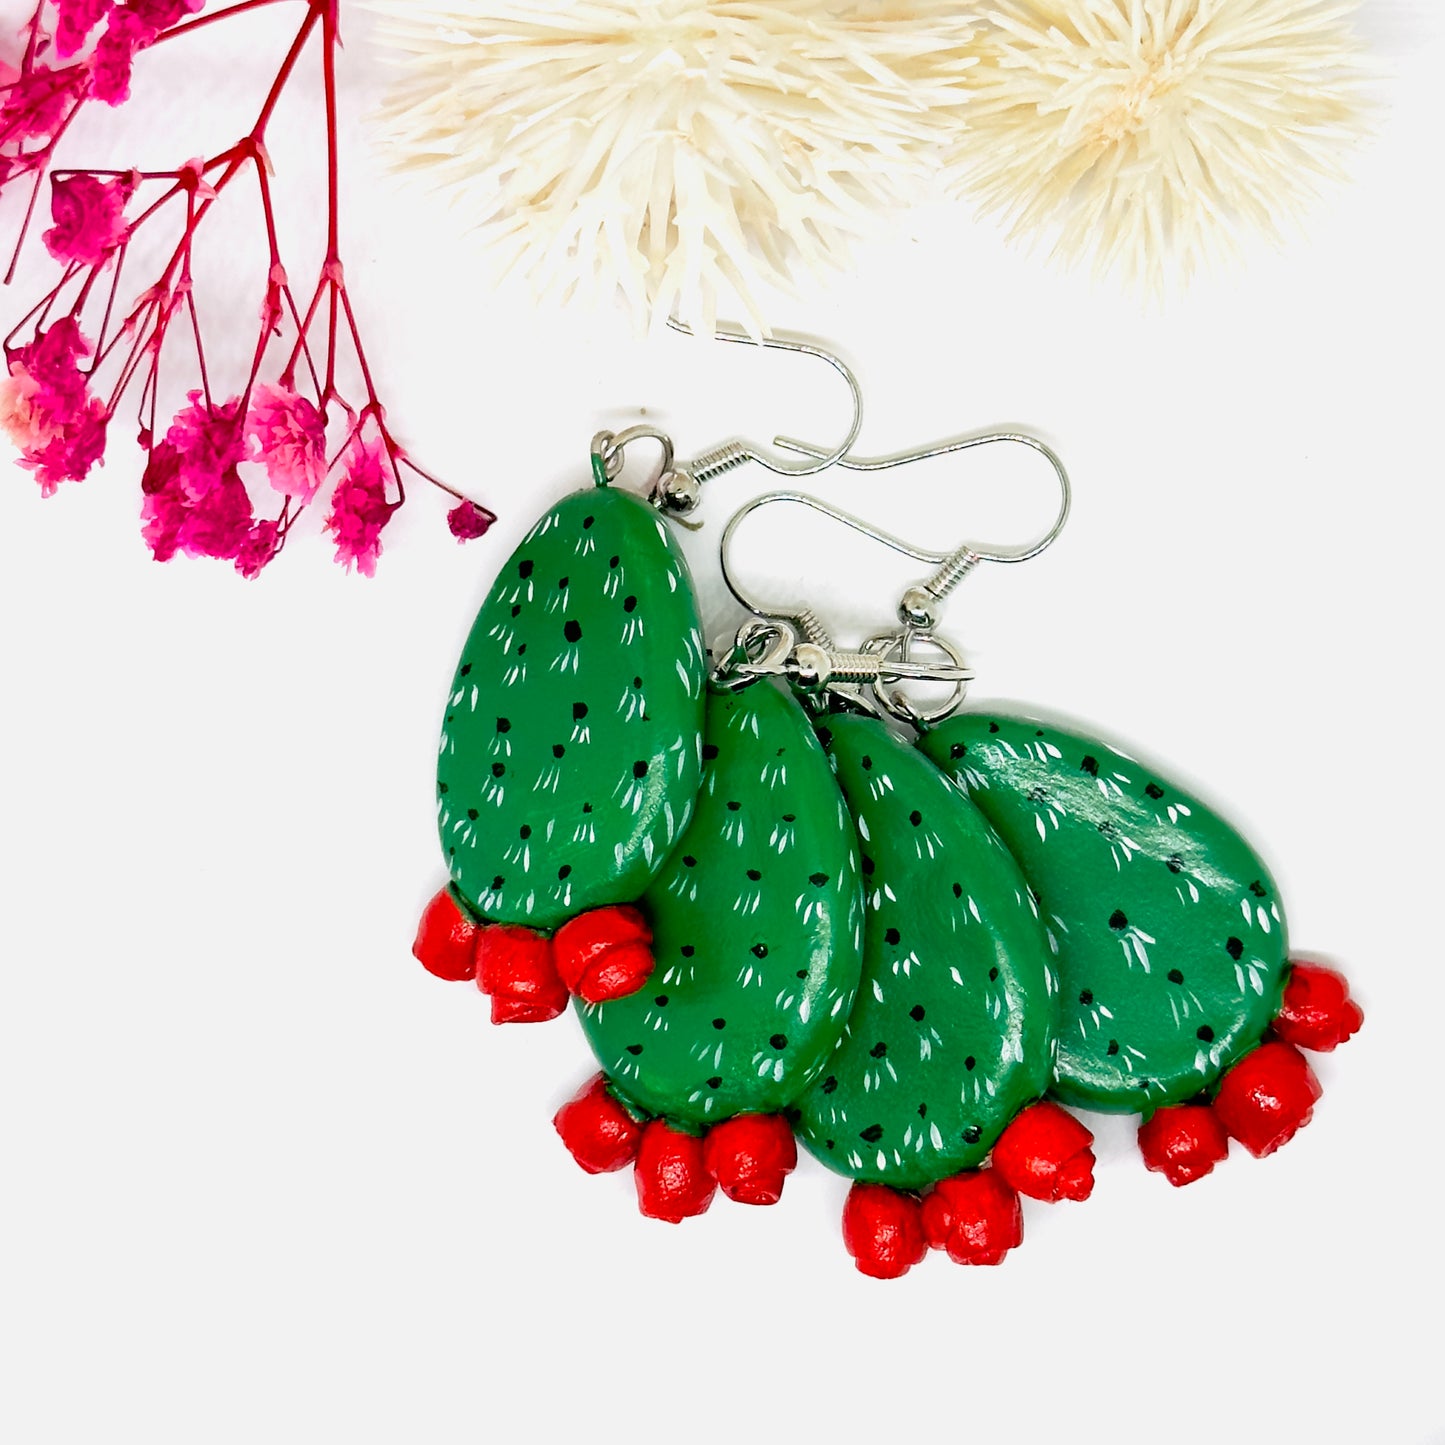  Clay cactus earrings handprinted by Mexican artisans with red cactus flowers for Mexicanias, claywelry, fridalovers, fridamaniacs, and Frida fans. Women girl gift idea.